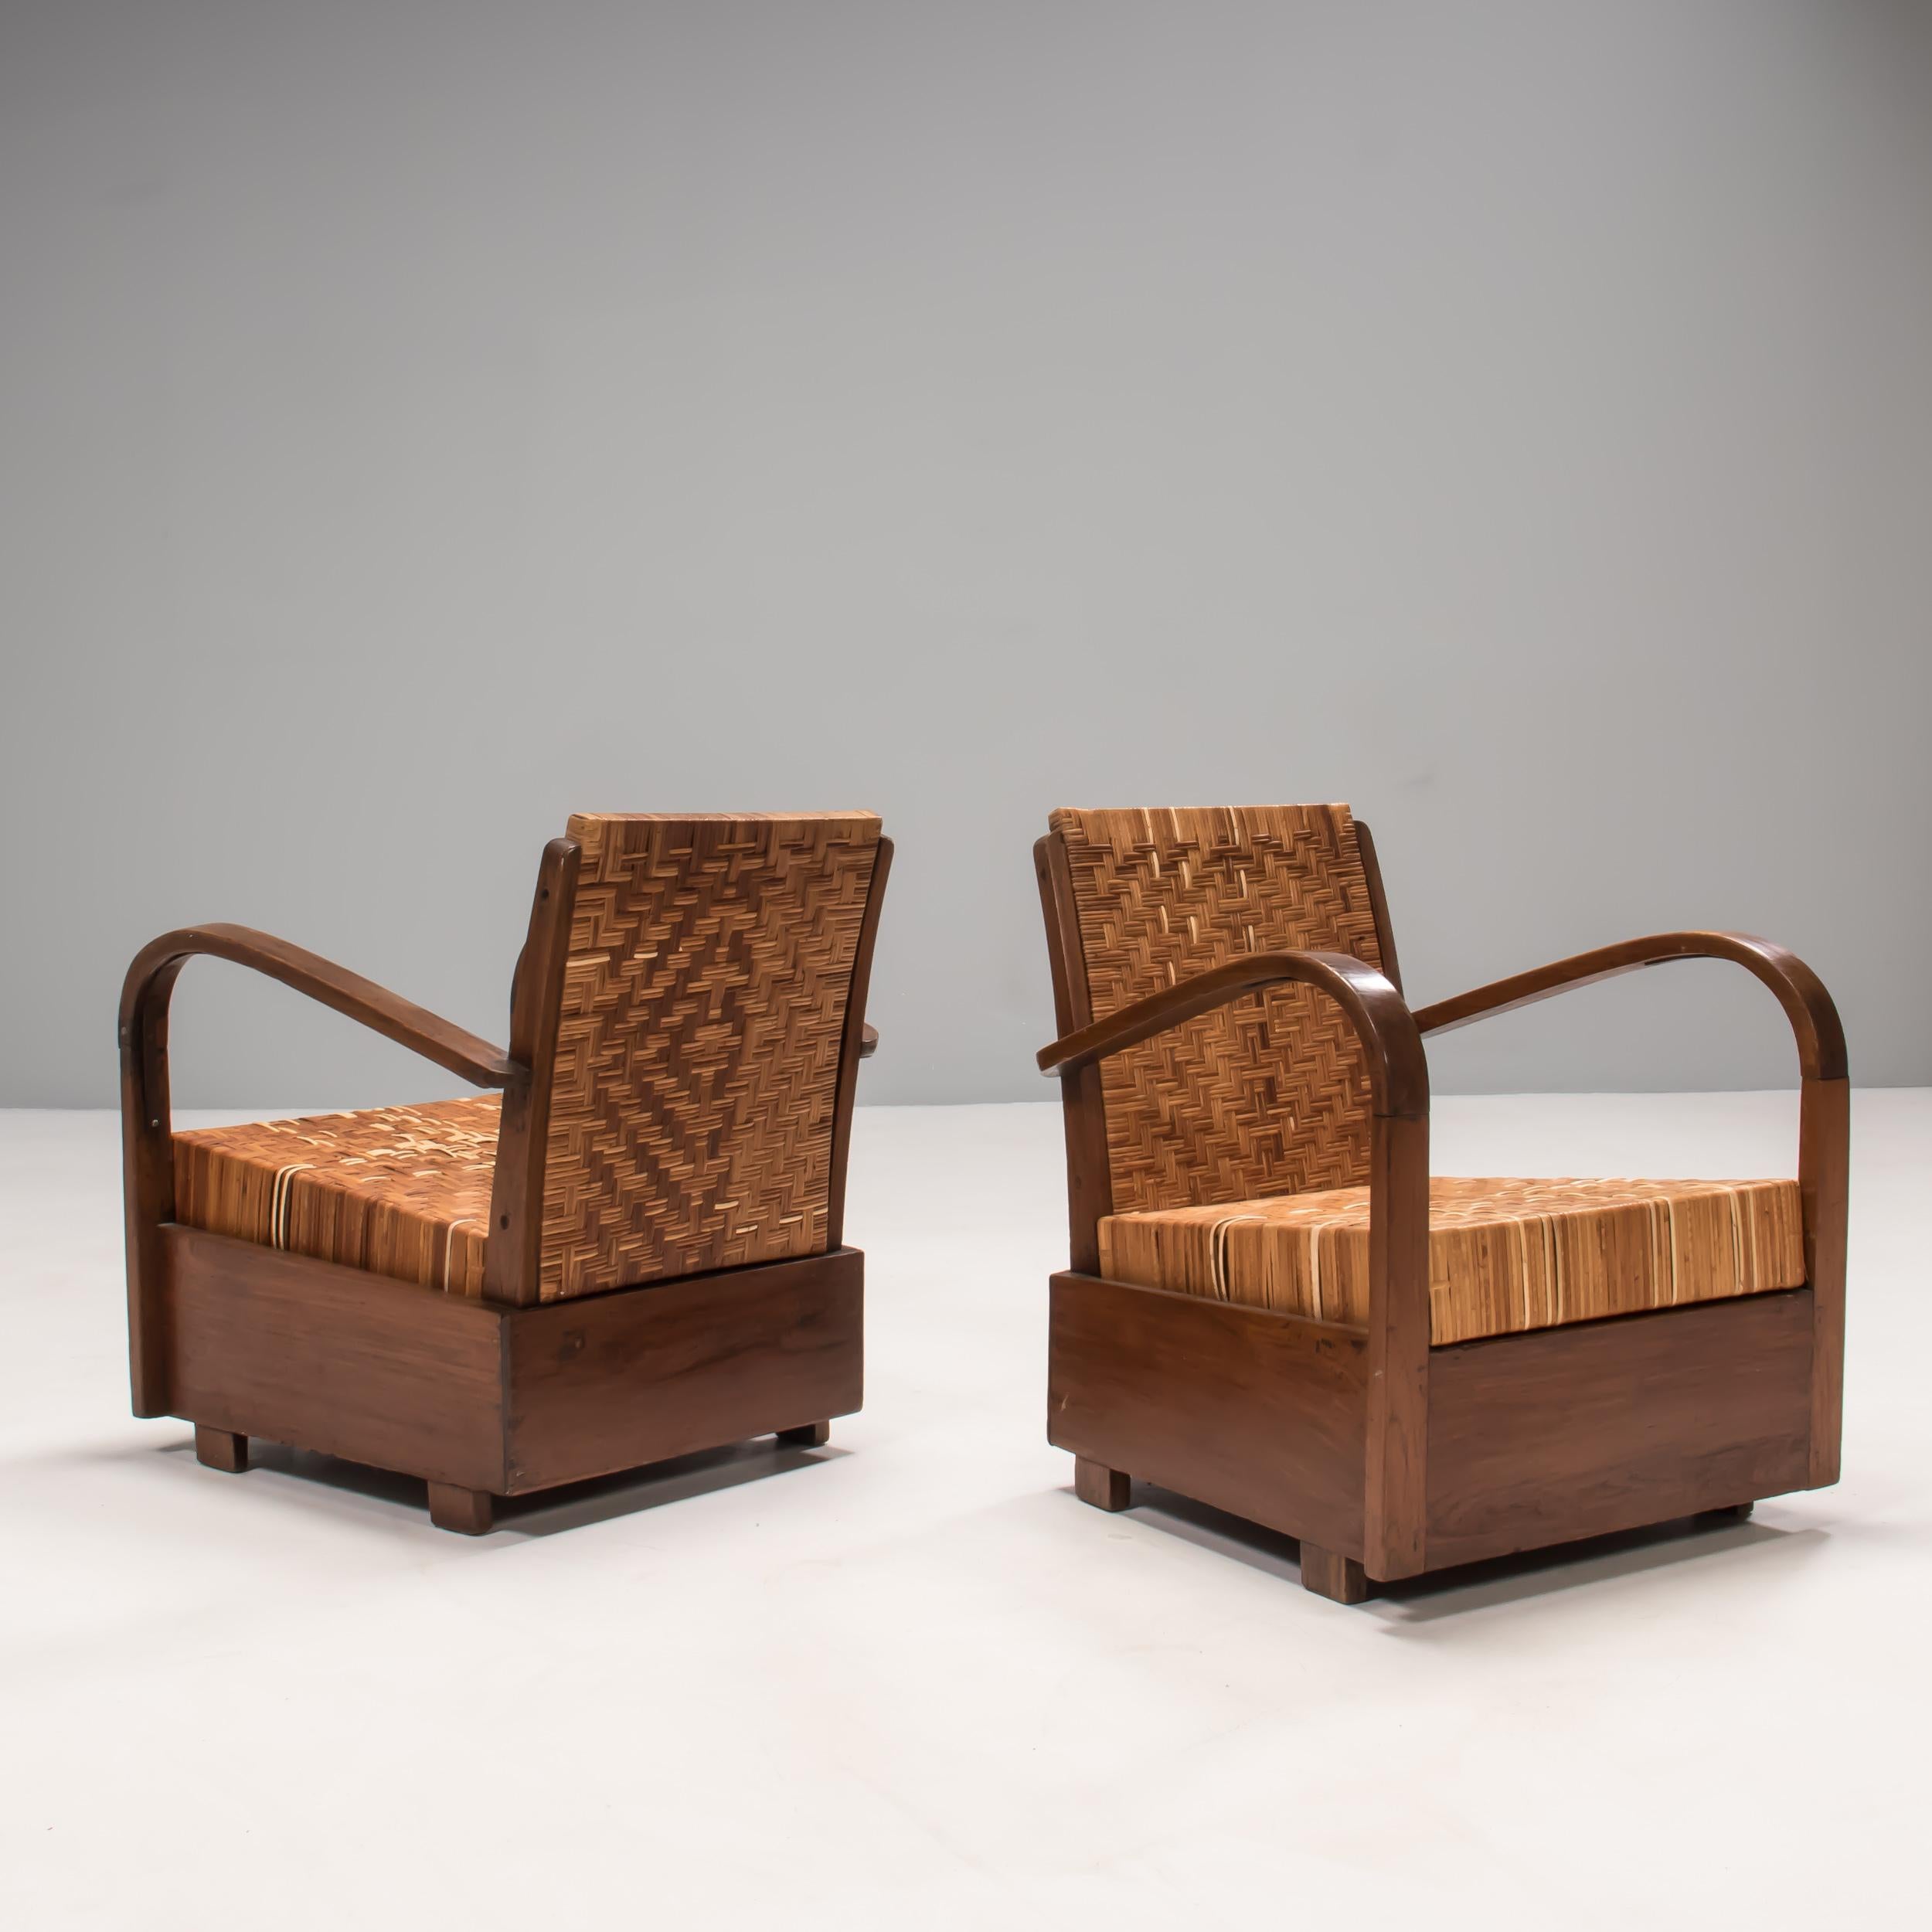 American Colonial 1920s Art Deco Teak & Cane Armchairs, Set of 2 For Sale